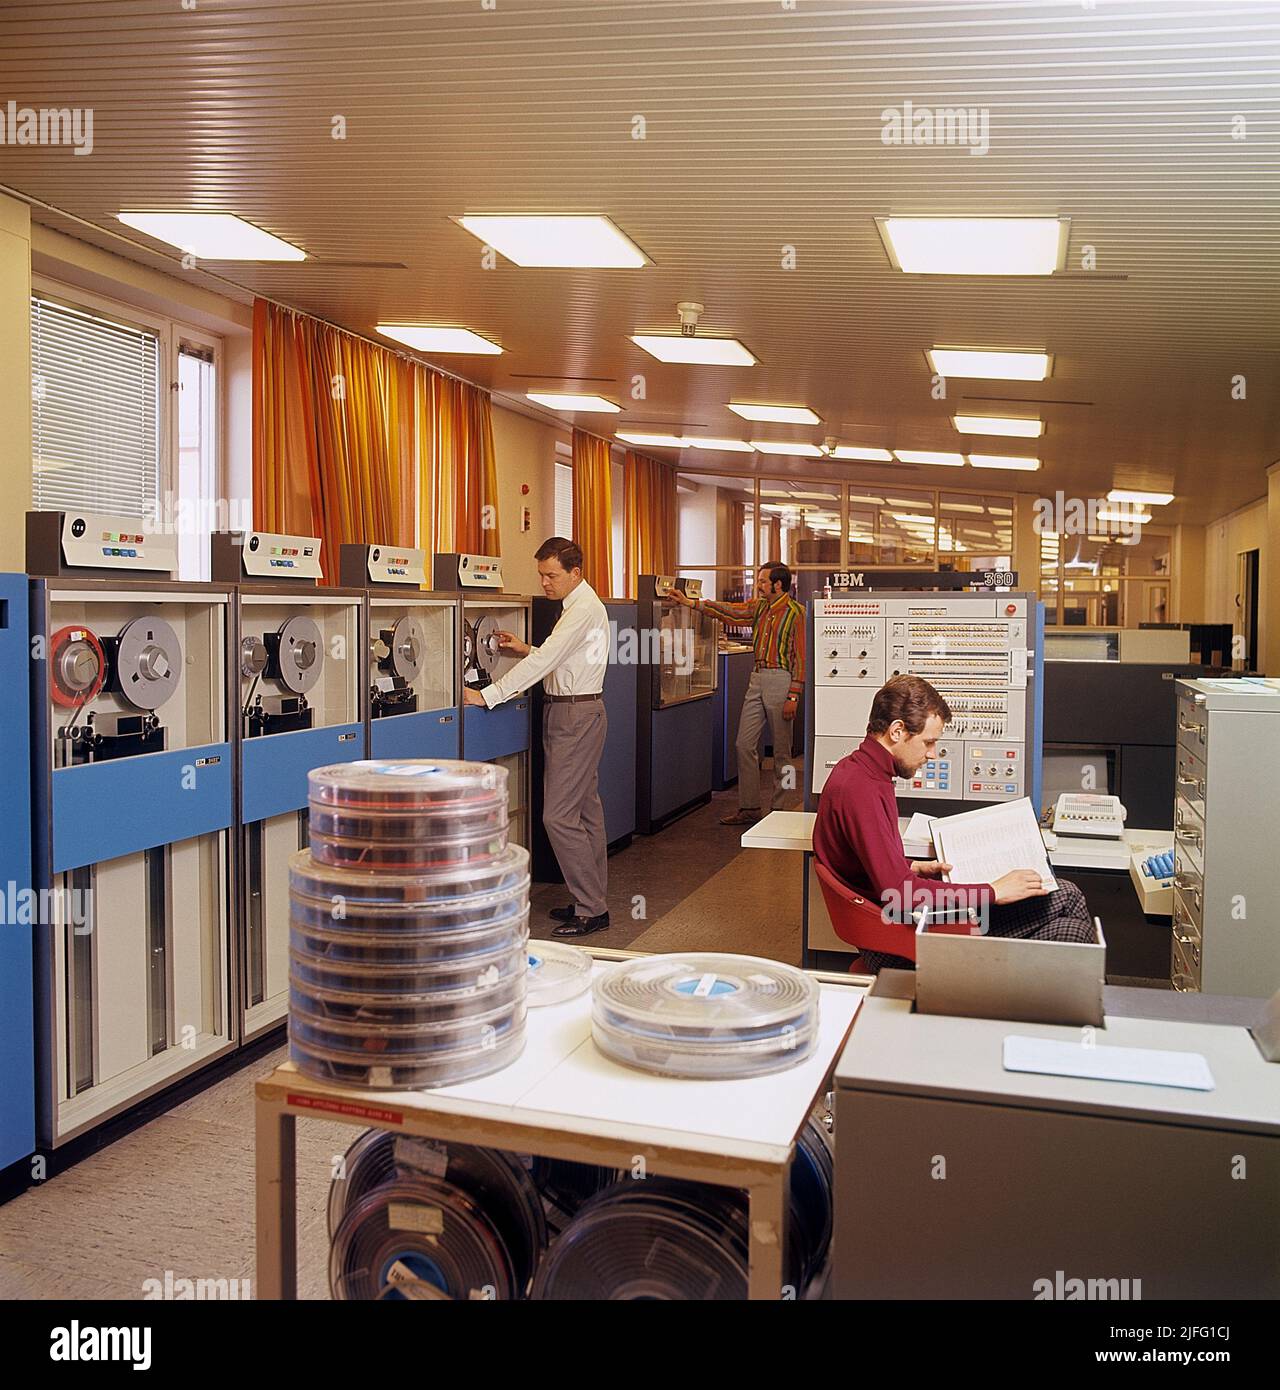 Computer engineering in the 1960s. An interior from the swedish government for employment that handles information with computers, and IBM system 360 with units to read datatapes and terminals to enter and register information. A picture like this represents the first steps towards the digital society where people became social security numbers. IBM system 360 was frequently seen in the american television-series Mad Men. Picture taken 1966. ref CV16-9 Stock Photo